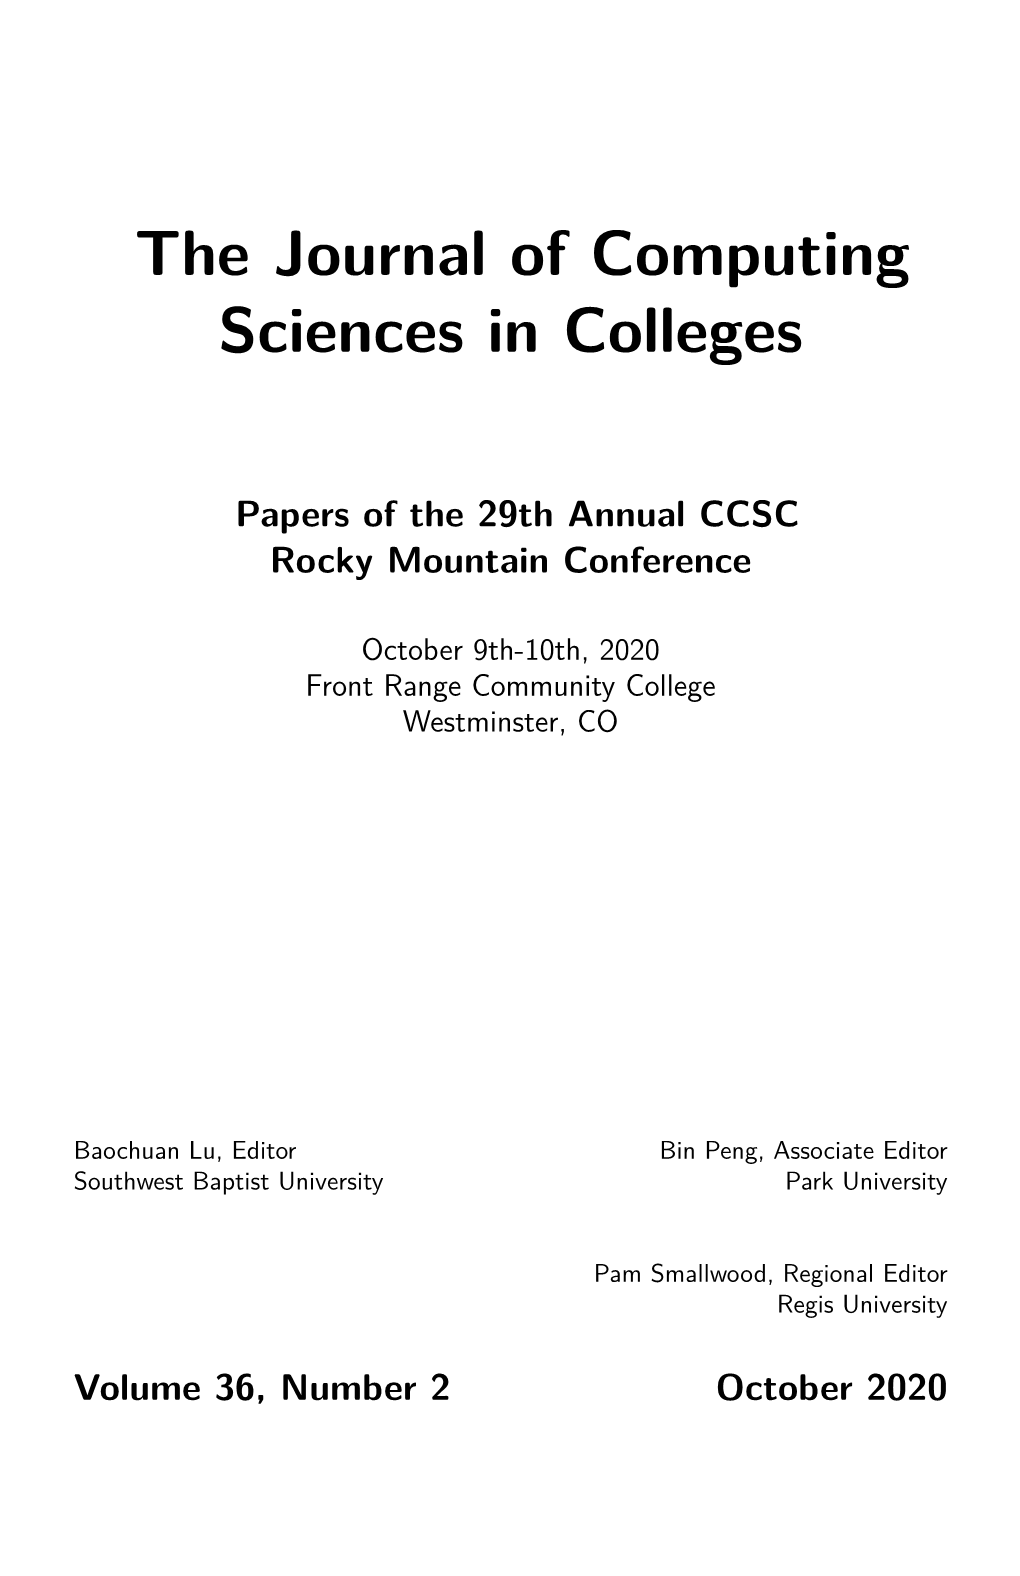 The Journal of Computing Sciences in Colleges